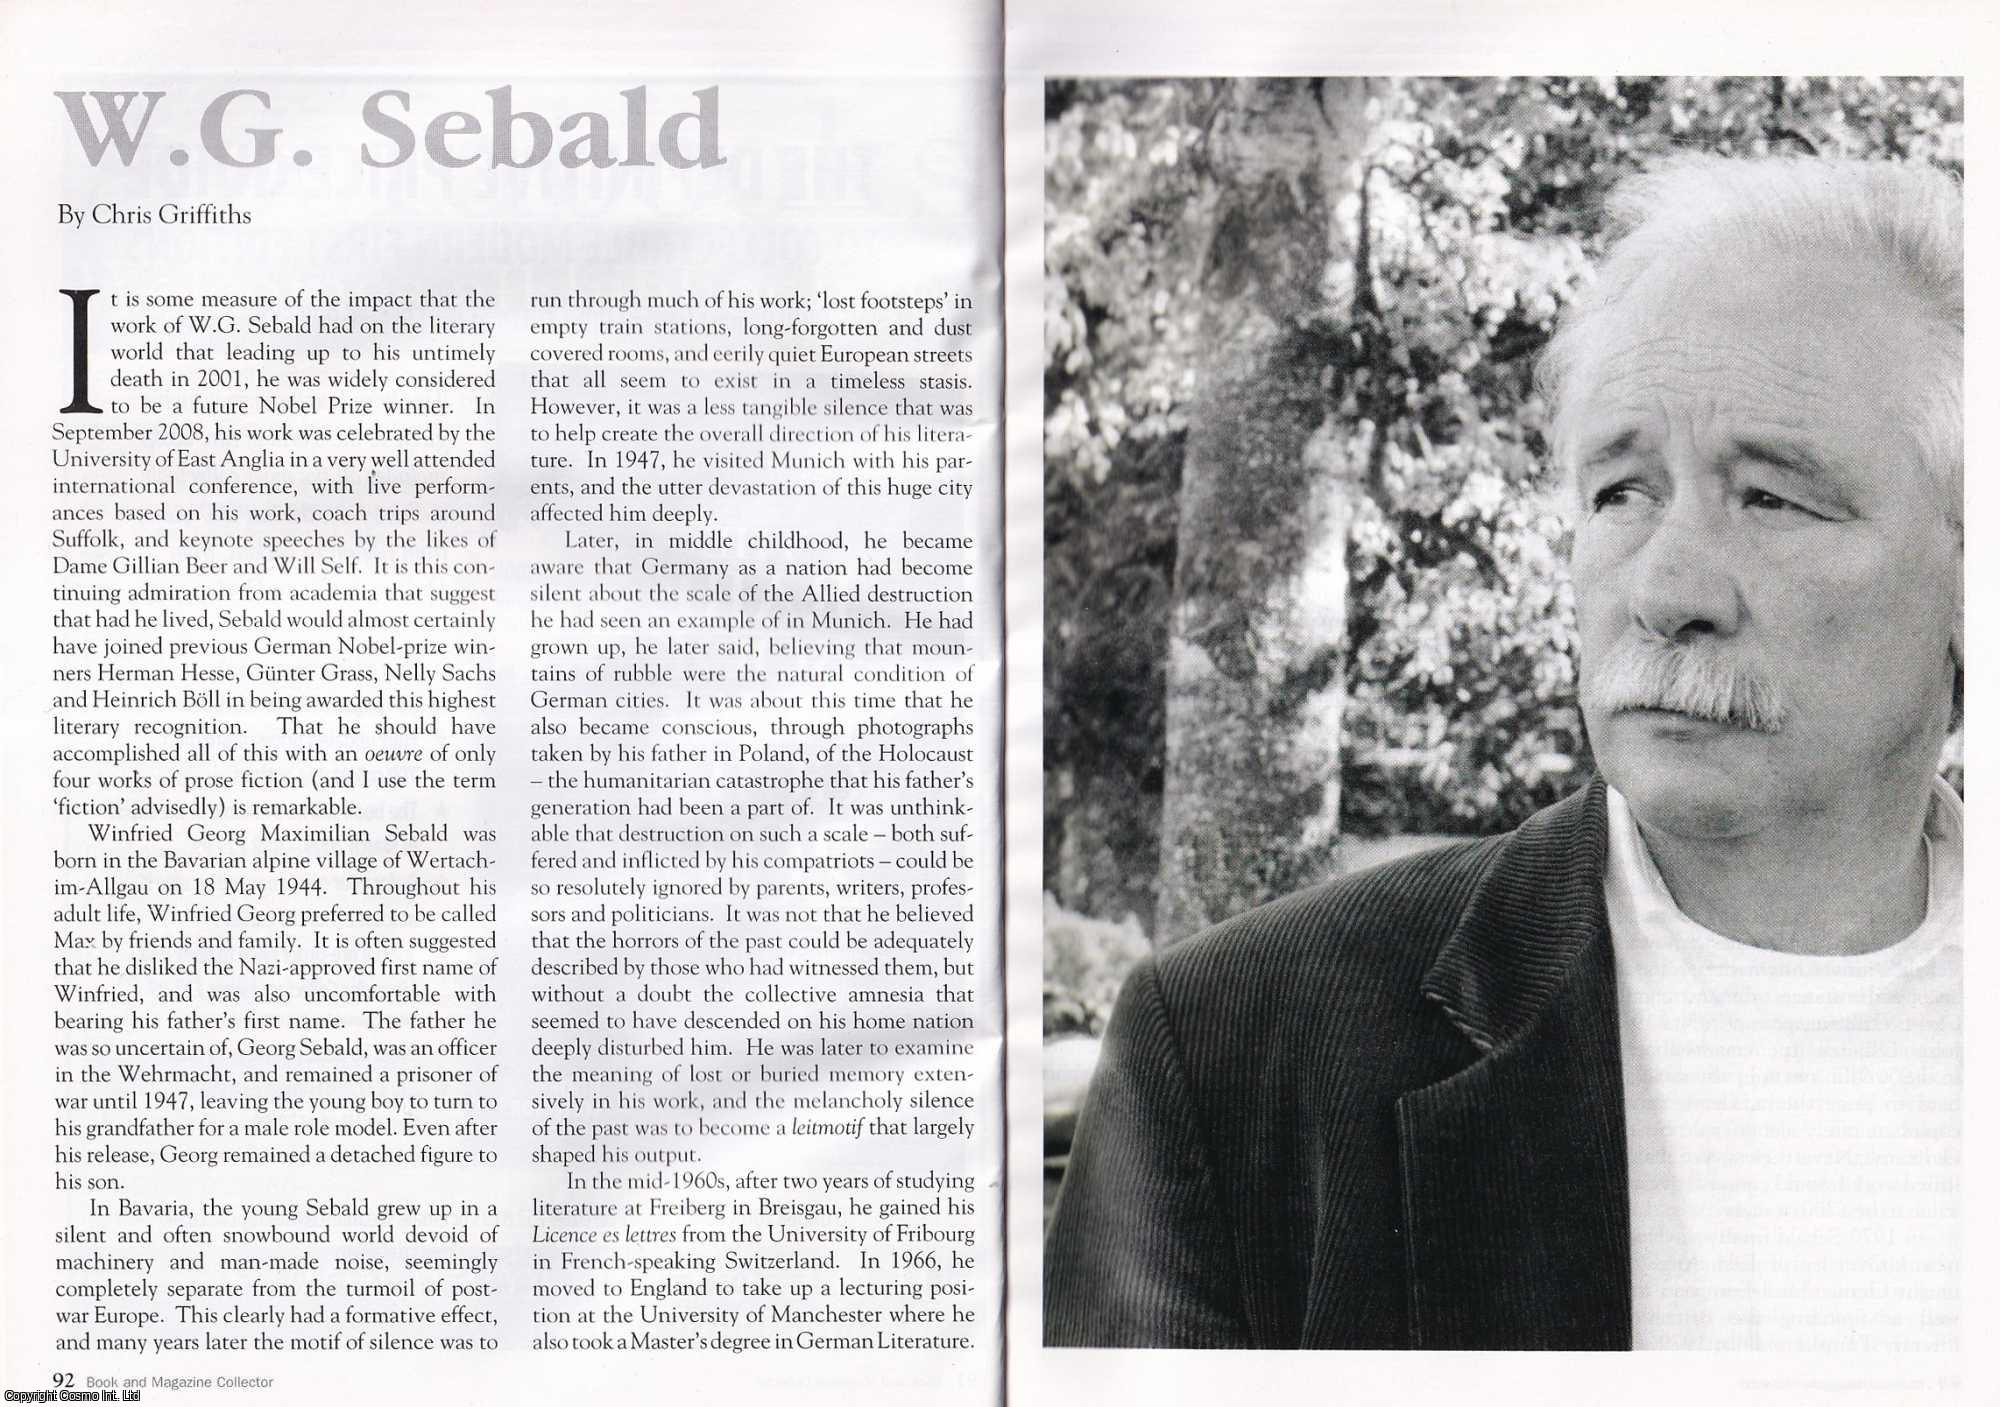 Chris Griffiths - W.G. Sebald. This is an original article separated from an issue of The Book & Magazine Collector publication, 2009.